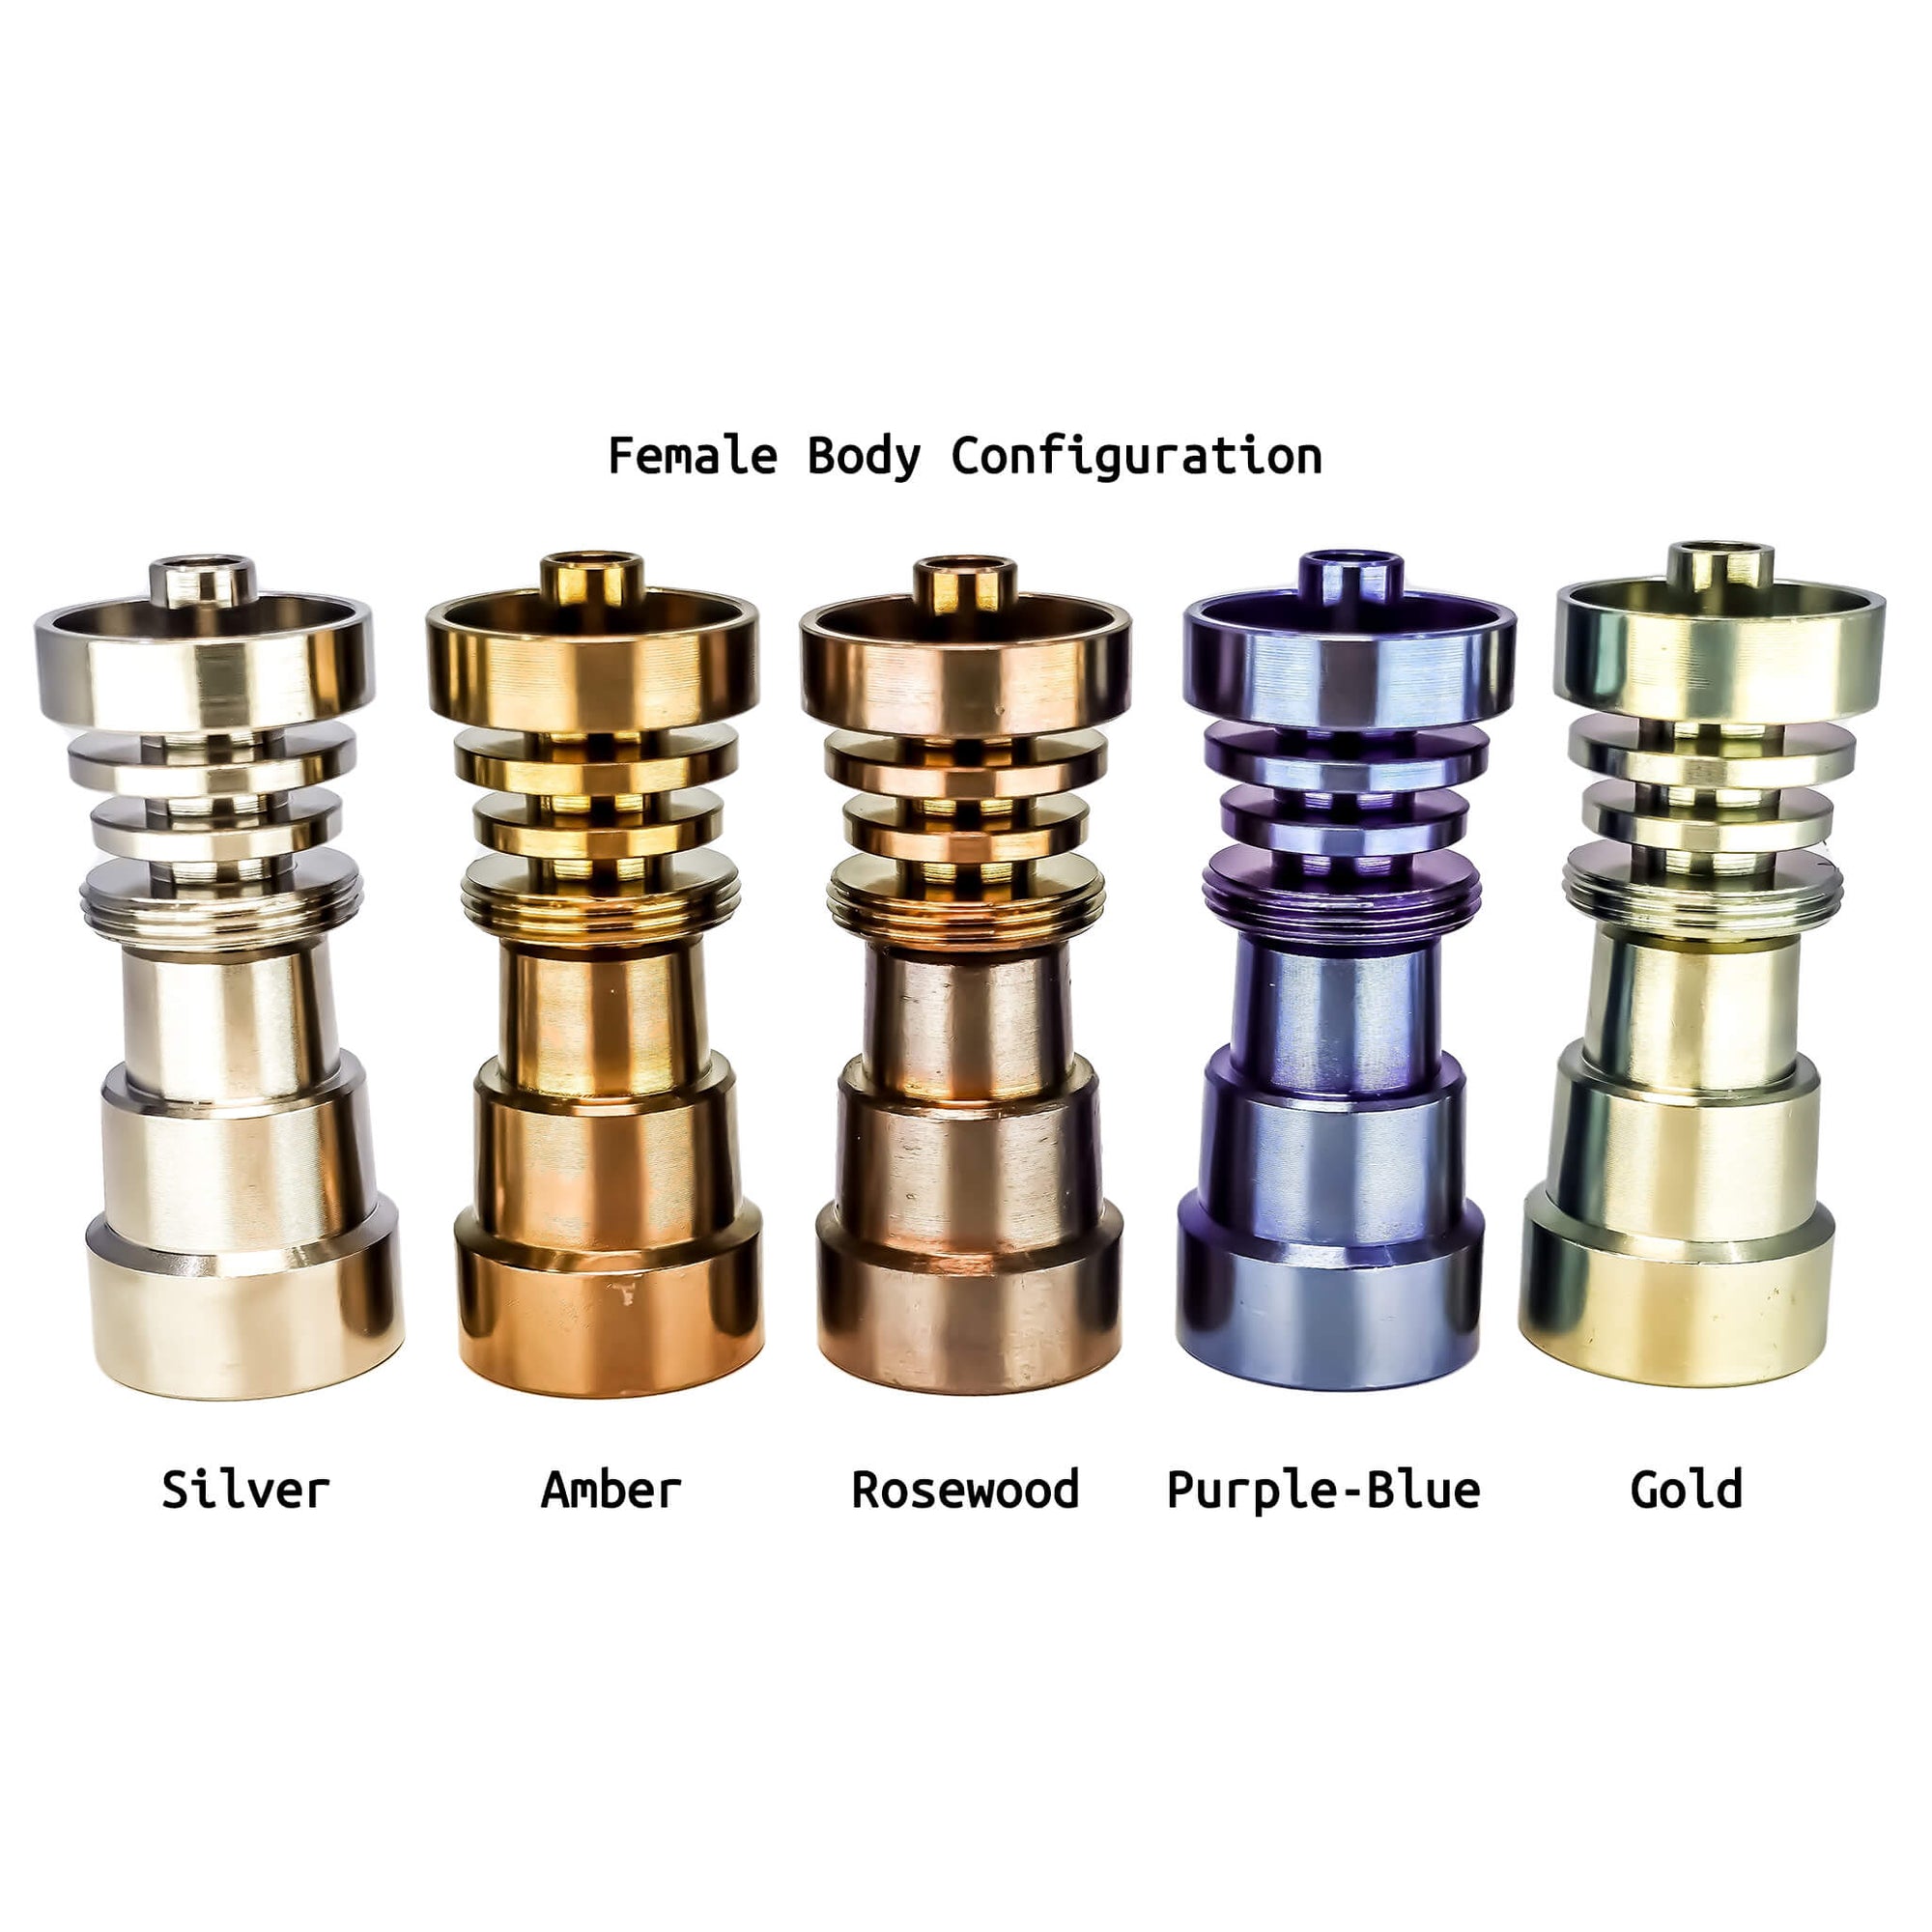 4-N-1 Titanium Nail Kit | All Five Color Variation View Female Bodied | Dabbing Warehouse